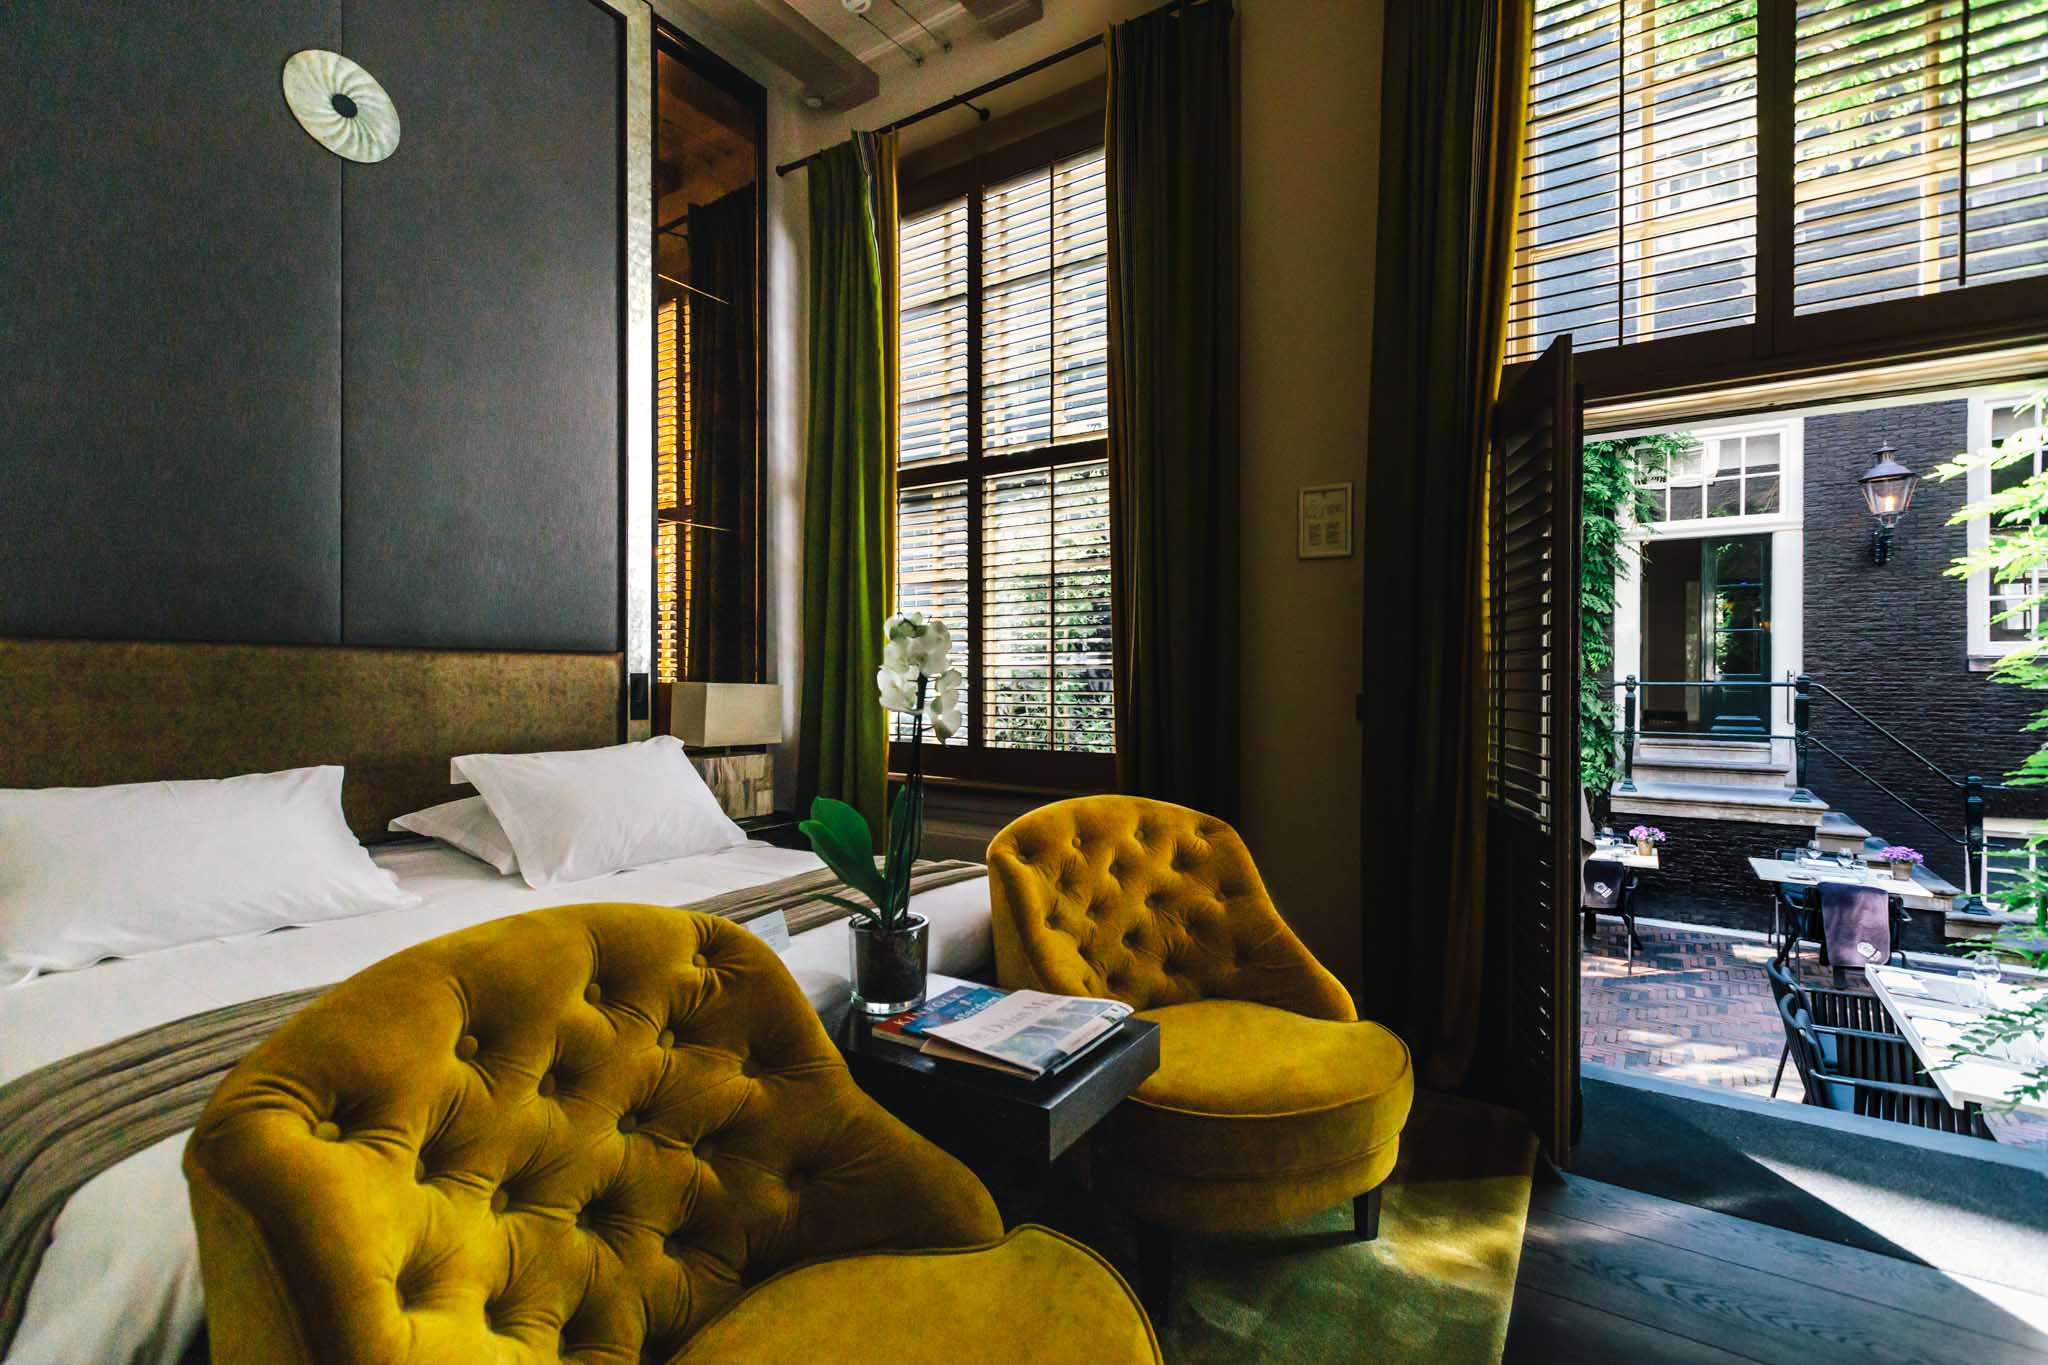 Loxura - Rooms - The Dylan Amsterdam